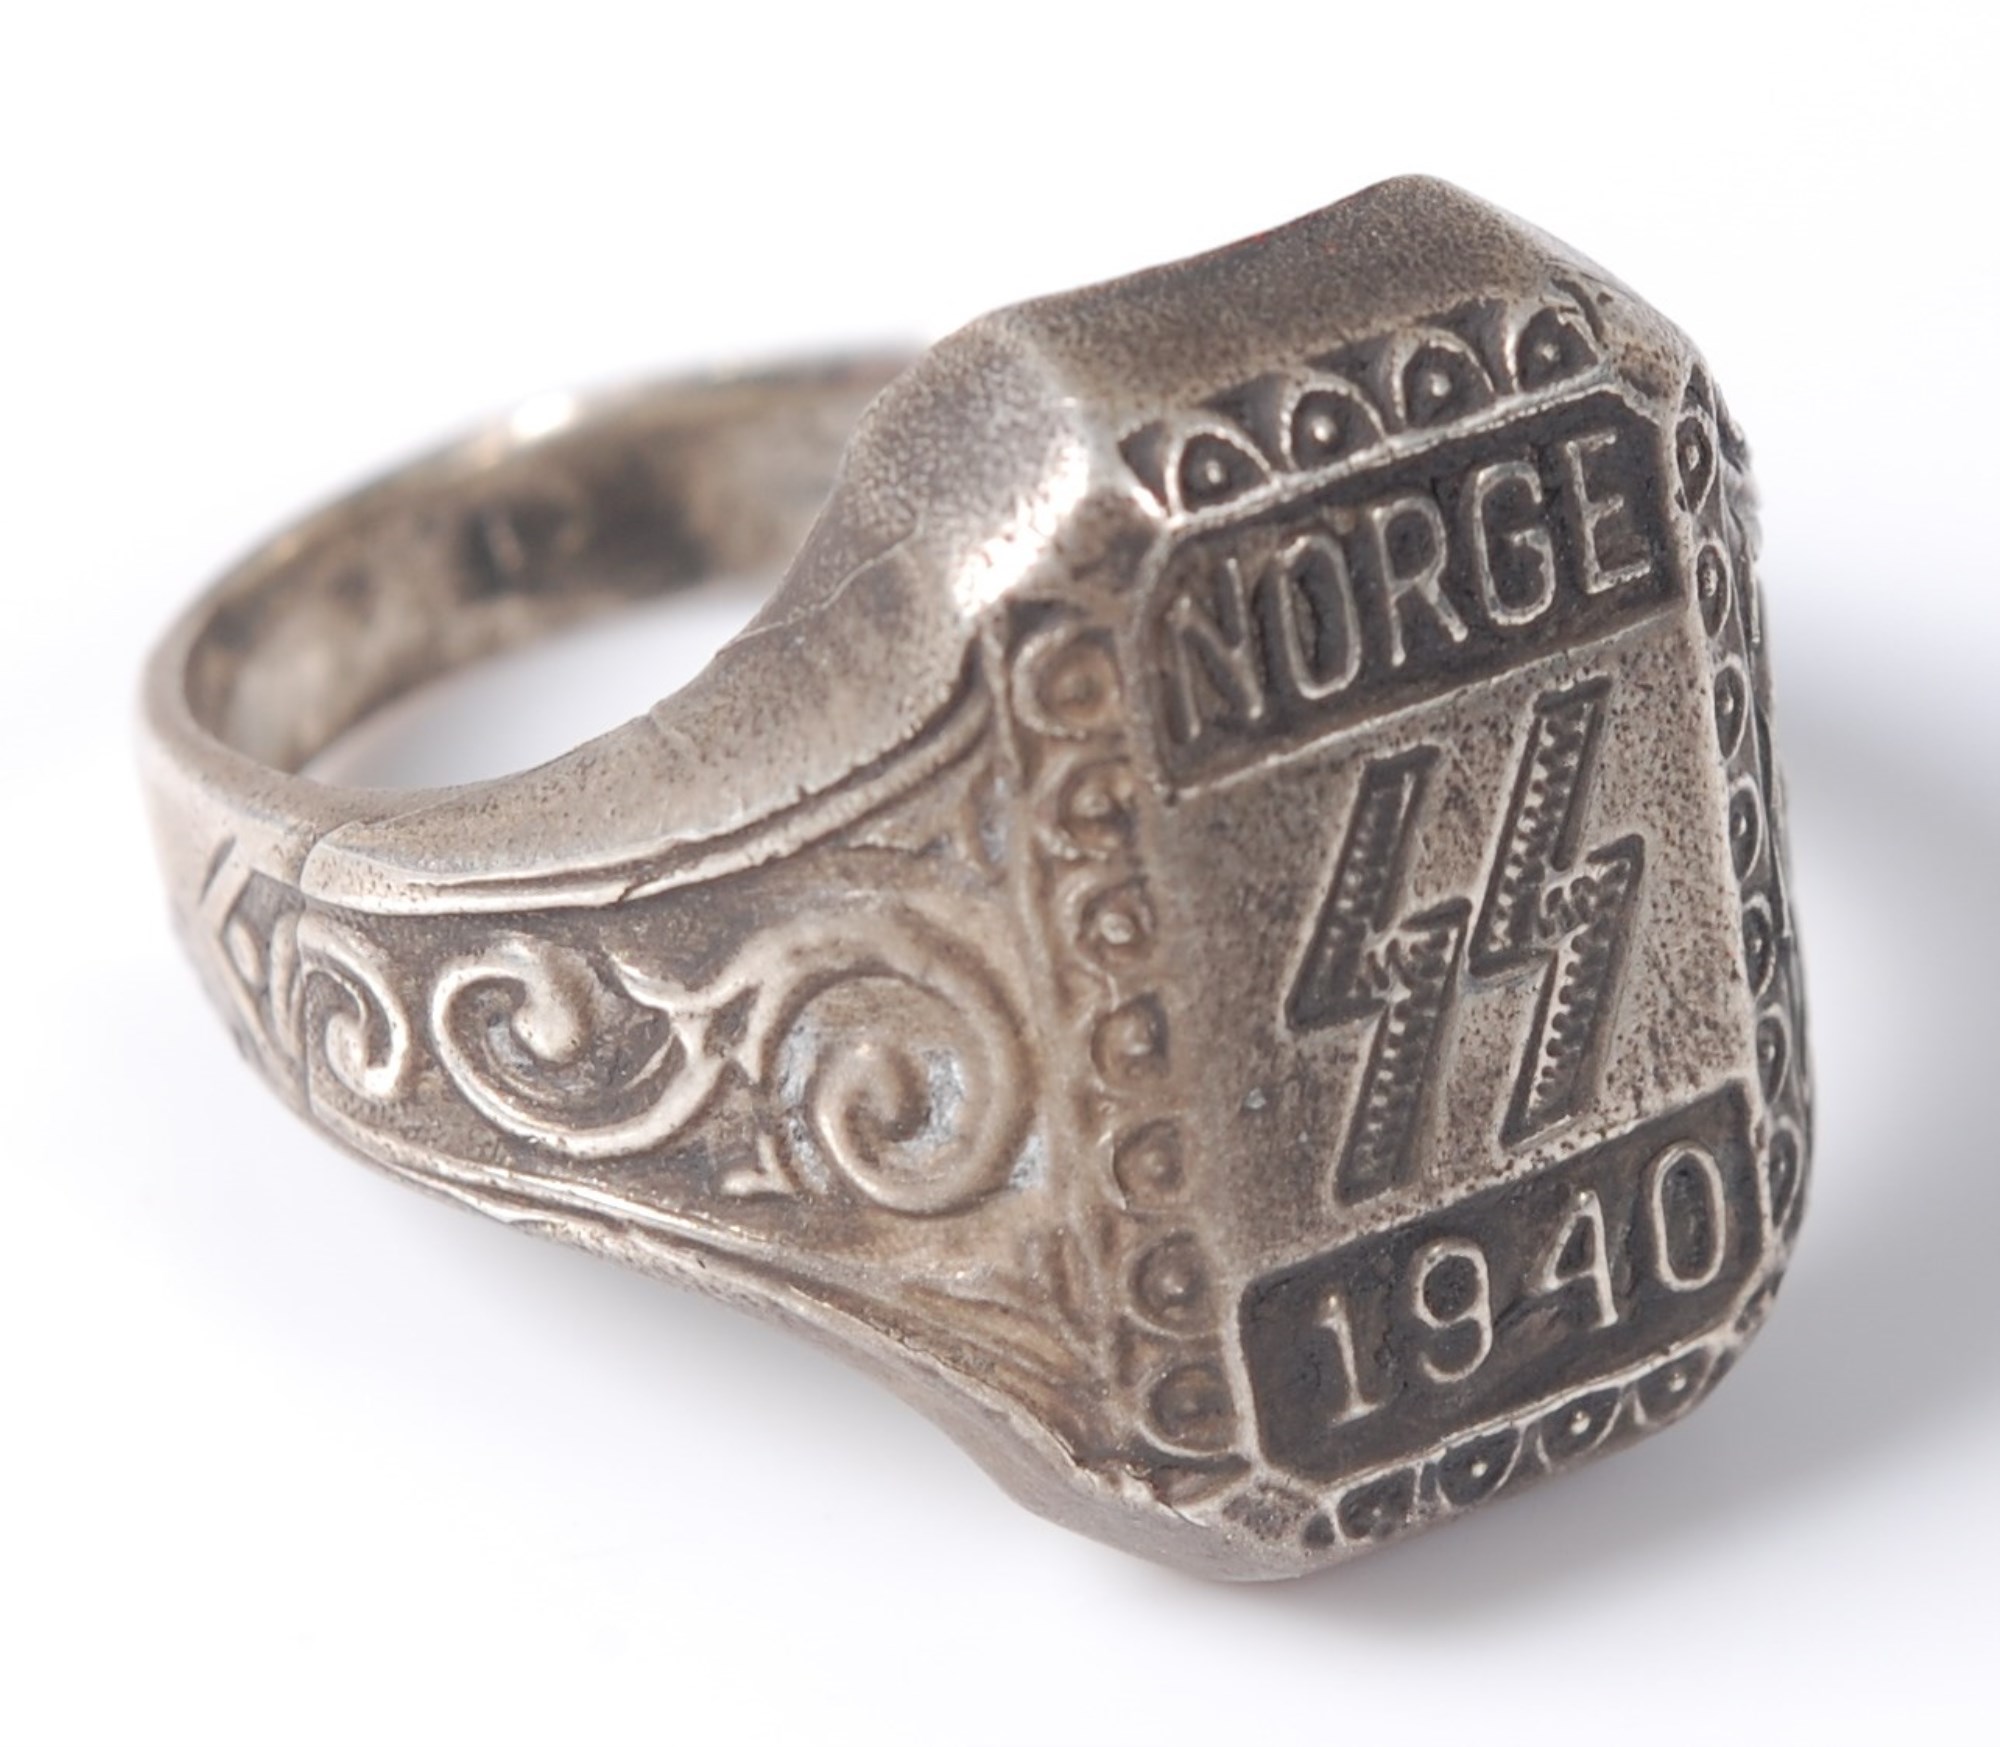 1272 - A German Norge 1940 Wiking Division